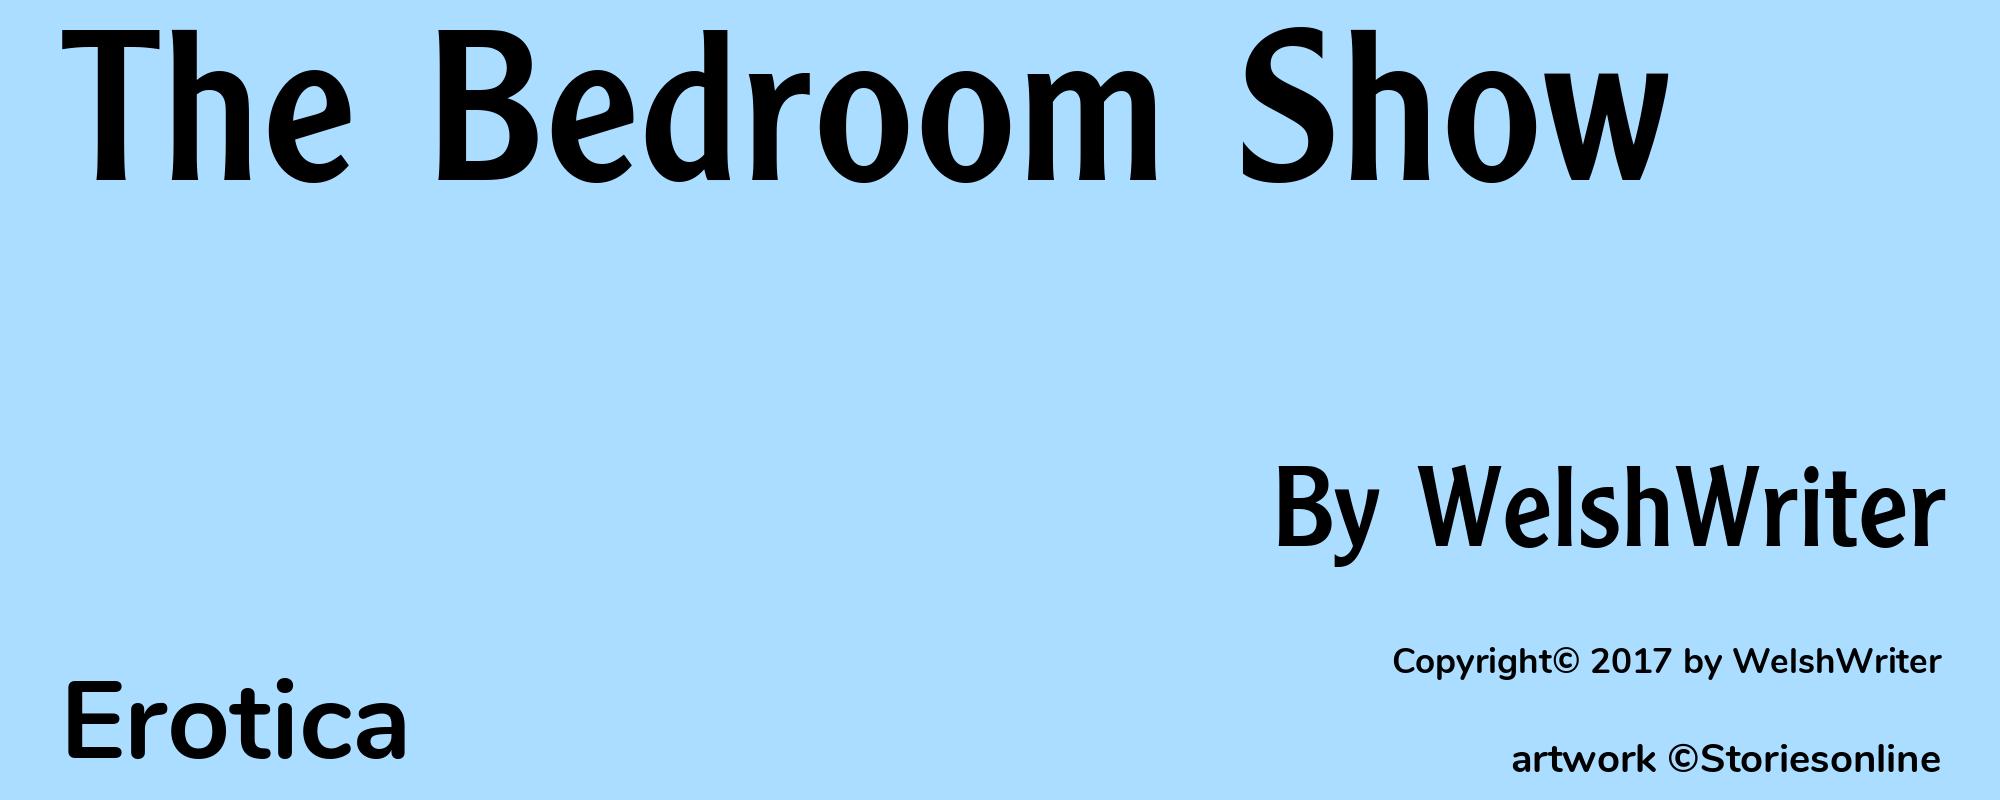 The Bedroom Show - Cover